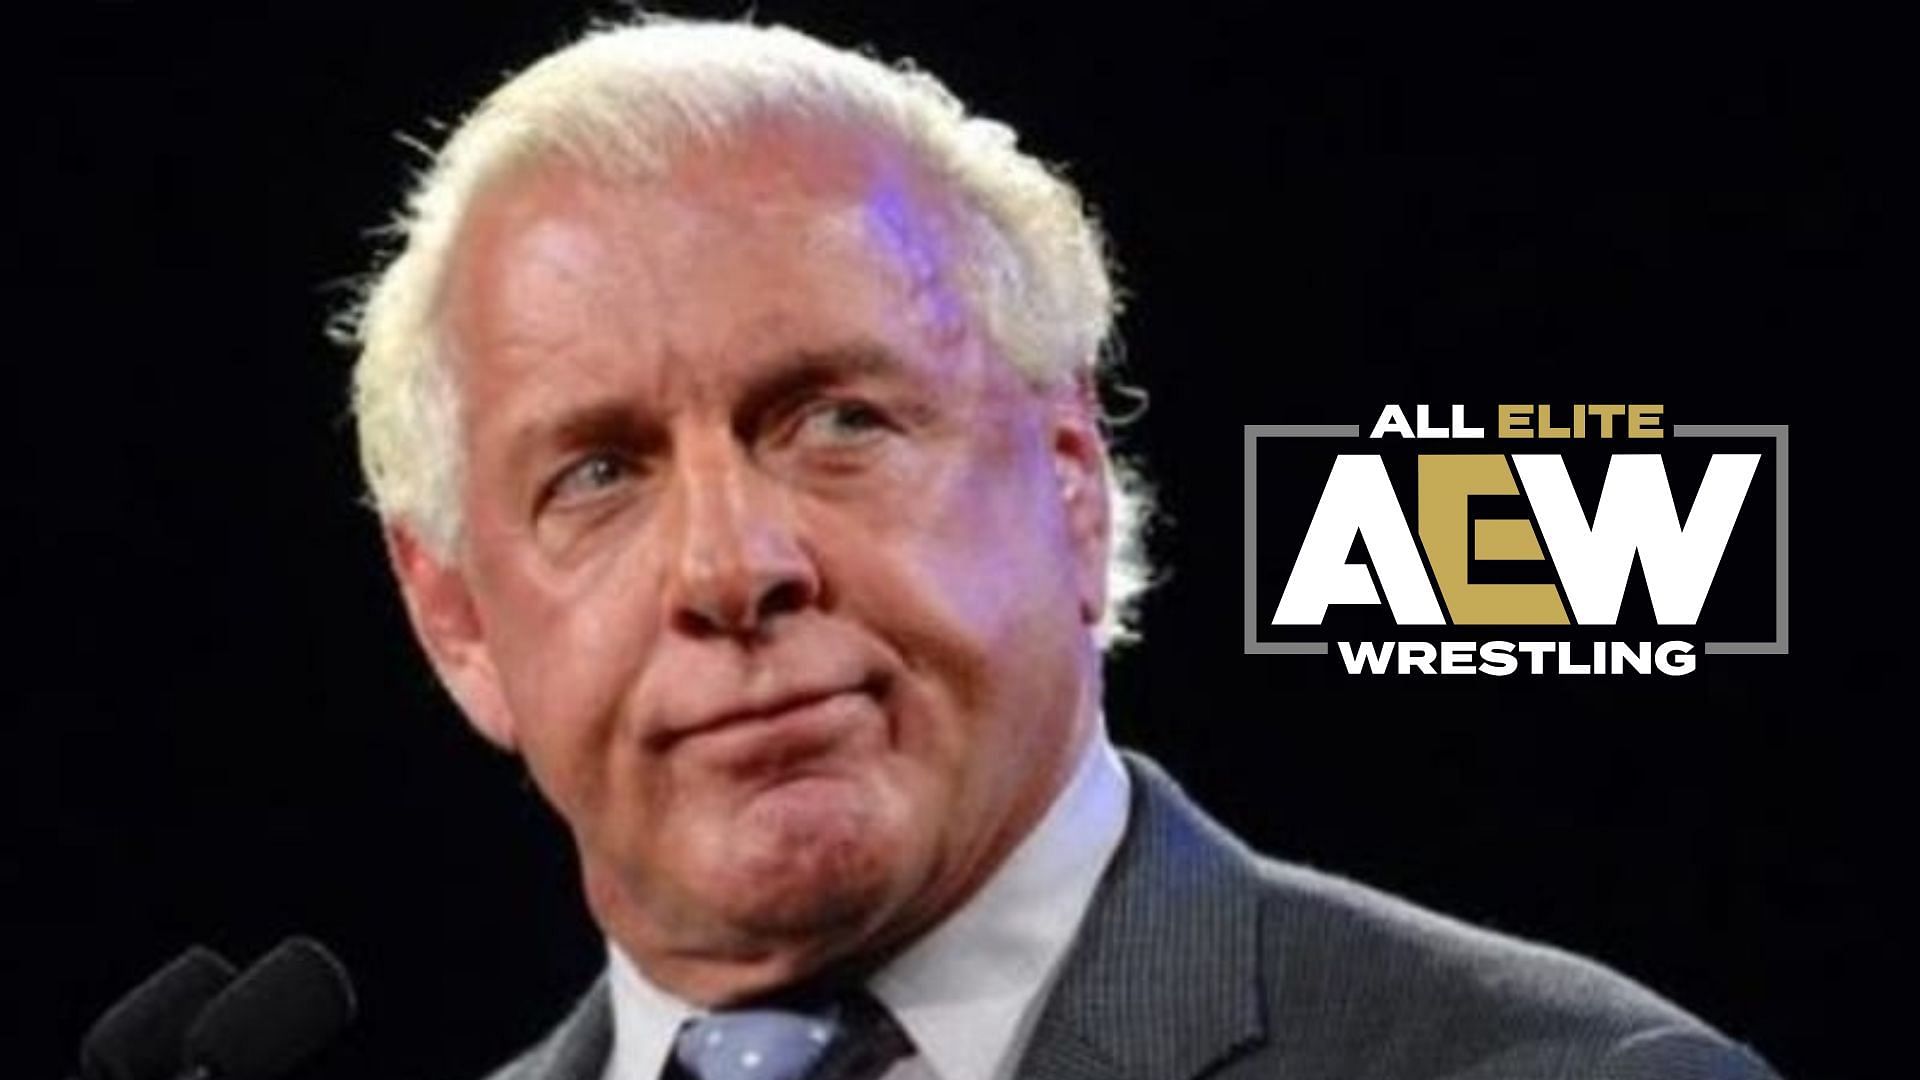 Why is Ric Flair in All Elite Wrestling?